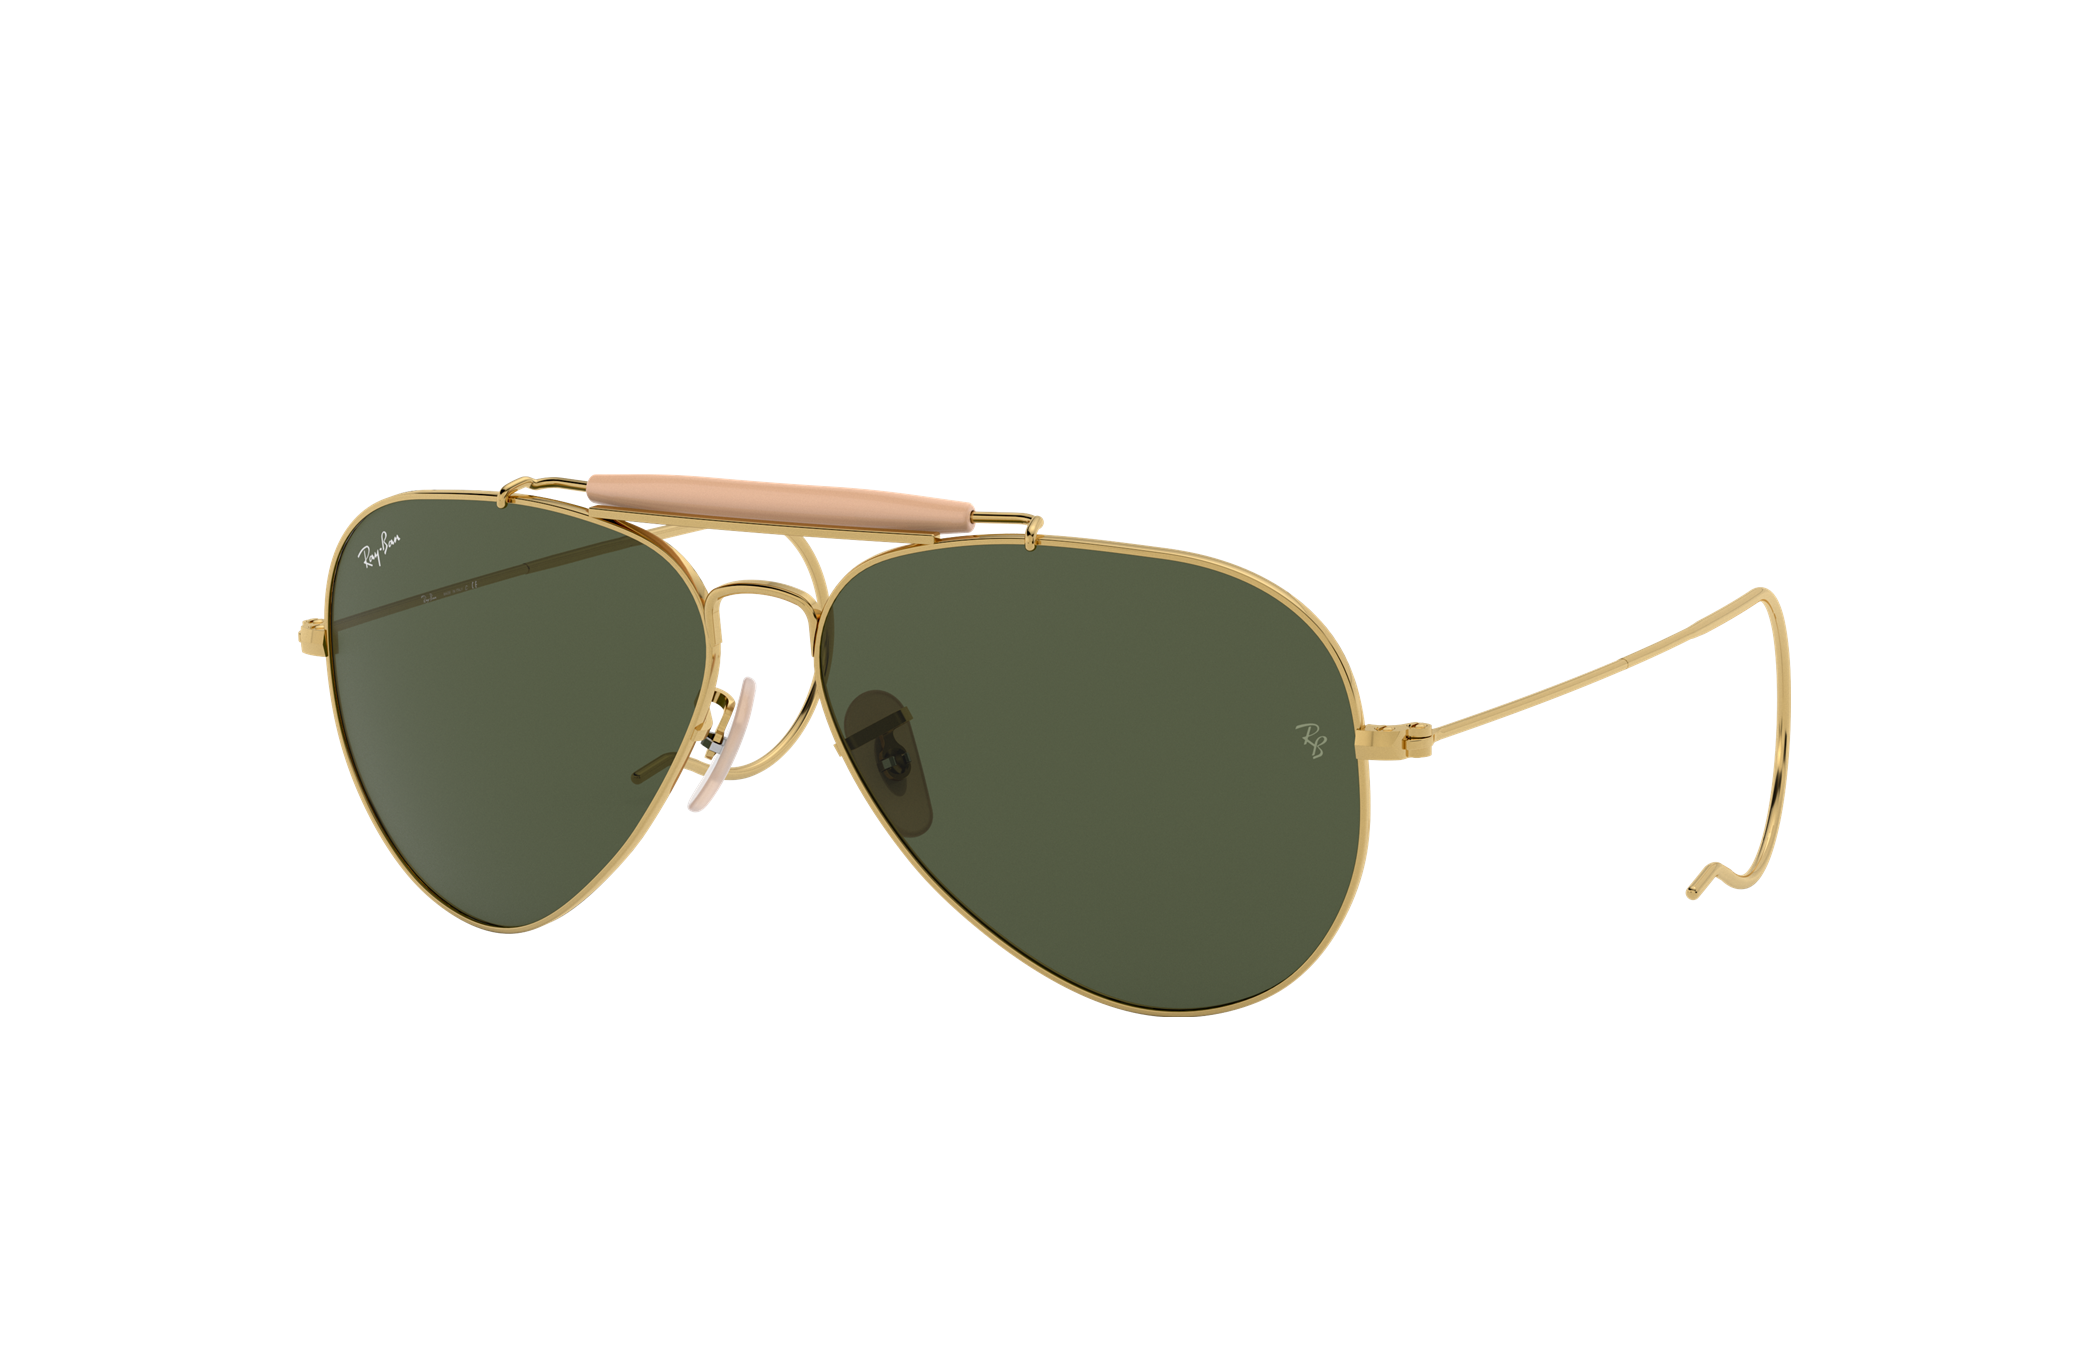 Ray-Ban Unisex UV Protected Green Lens Square Sunglasses - 0RB2132 : Ray-Ban:  Amazon.in: Fashion